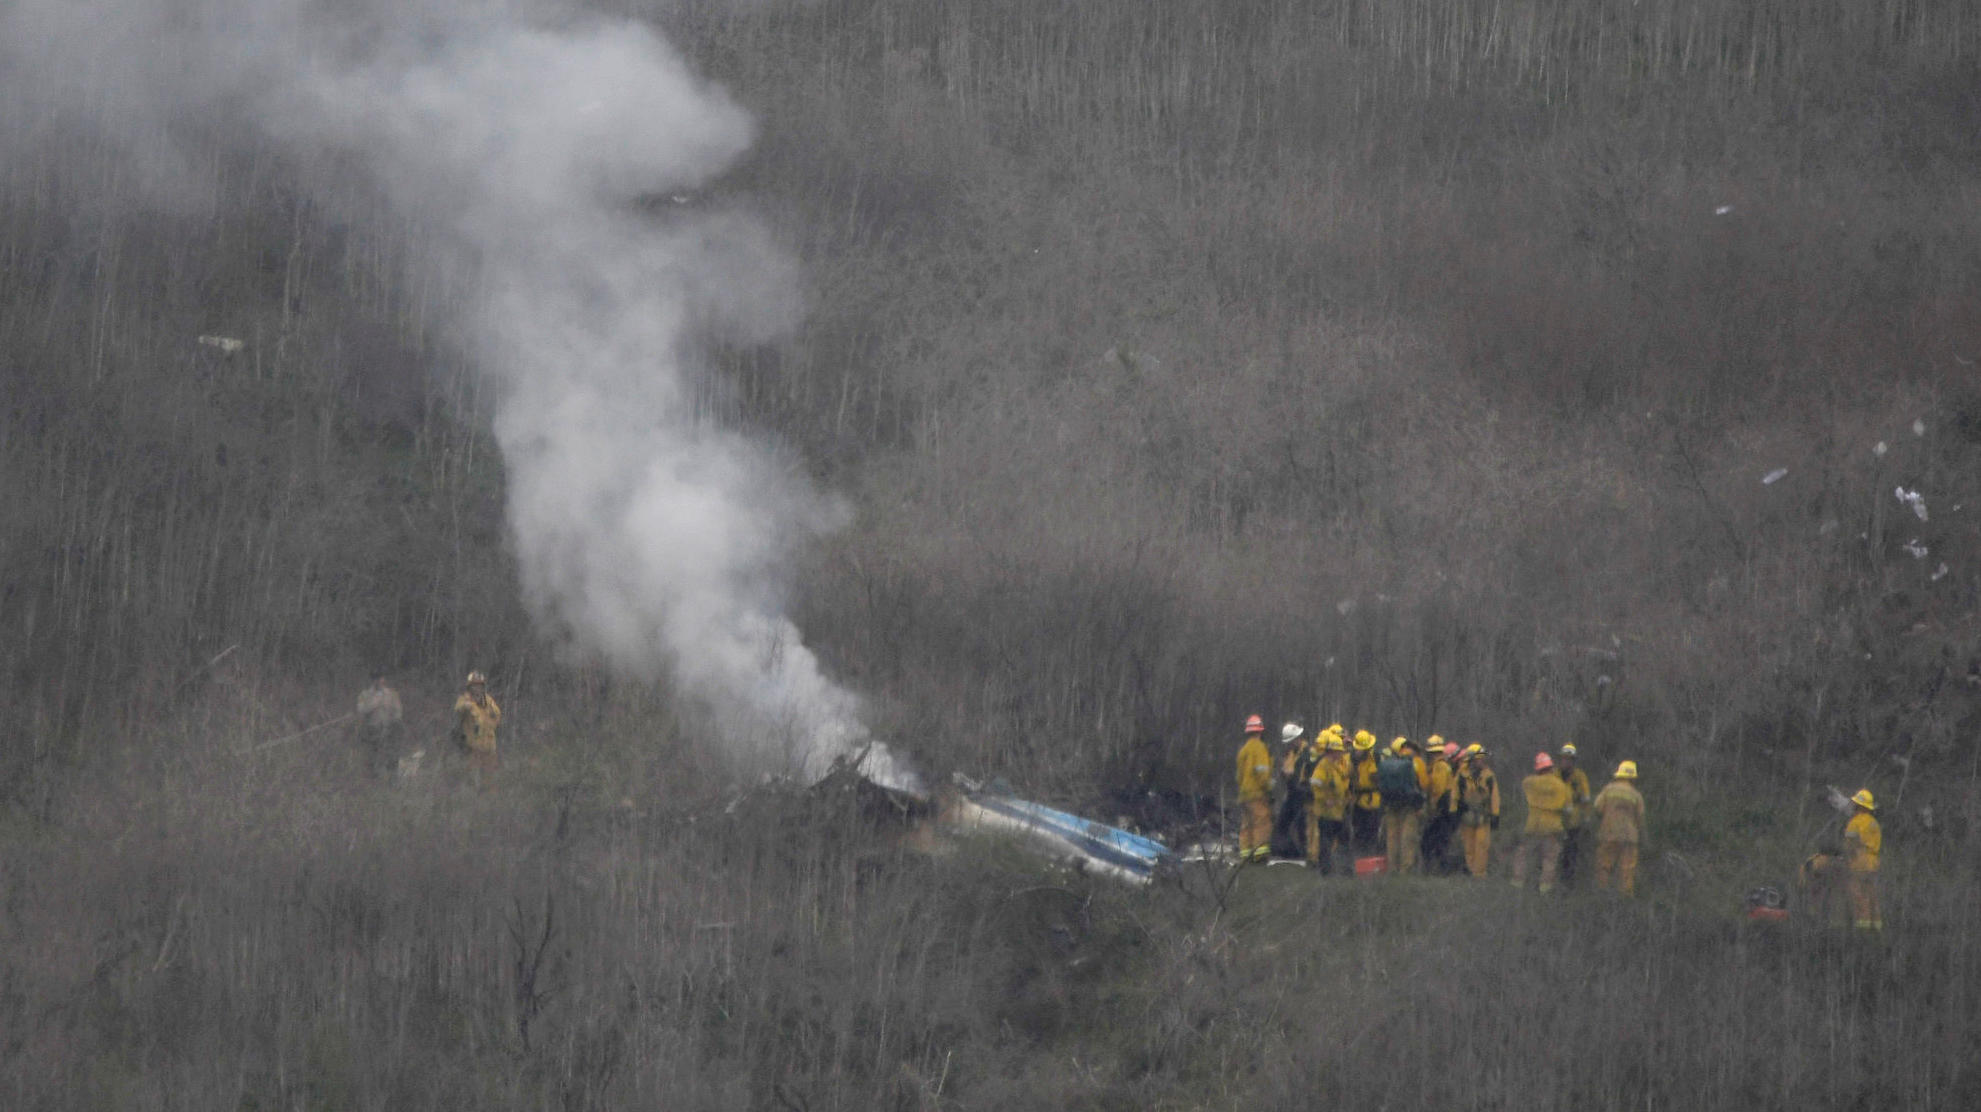 LA county firefighters on the scene of a helicopter crash that reportedly killed Kobe Bryant in Calabasas, California, U.S., January 26, 2020. REUTERS/Gene Blevins